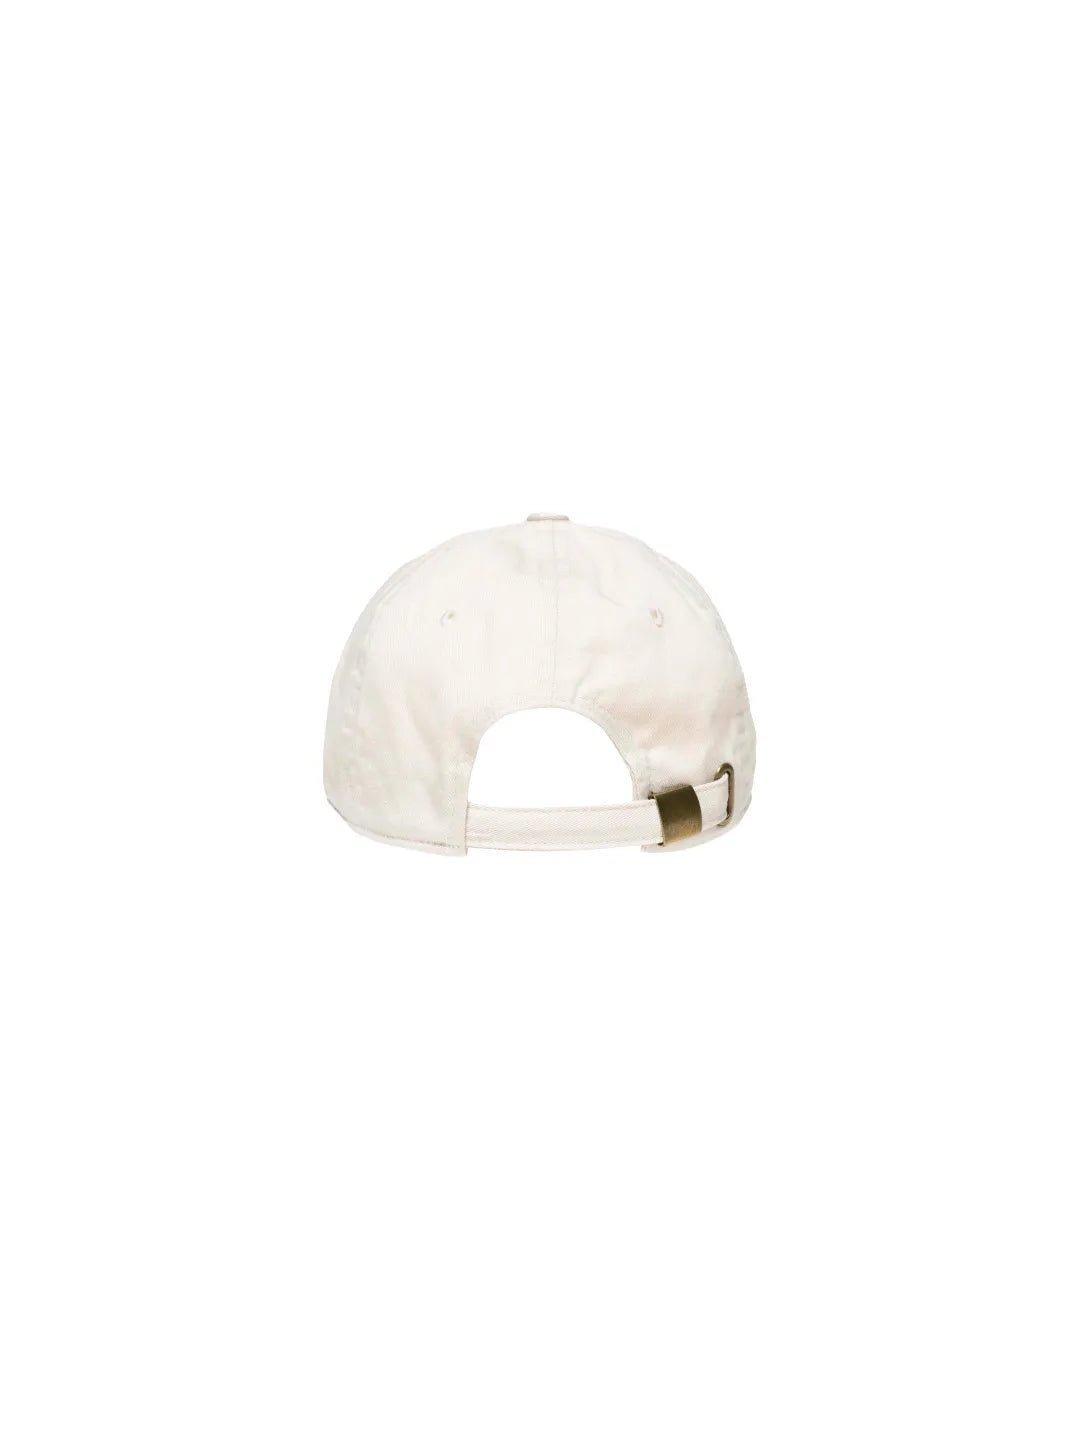 Space available Nature Cap - Offwhite - SUPERCONSCIOUS BERLIN